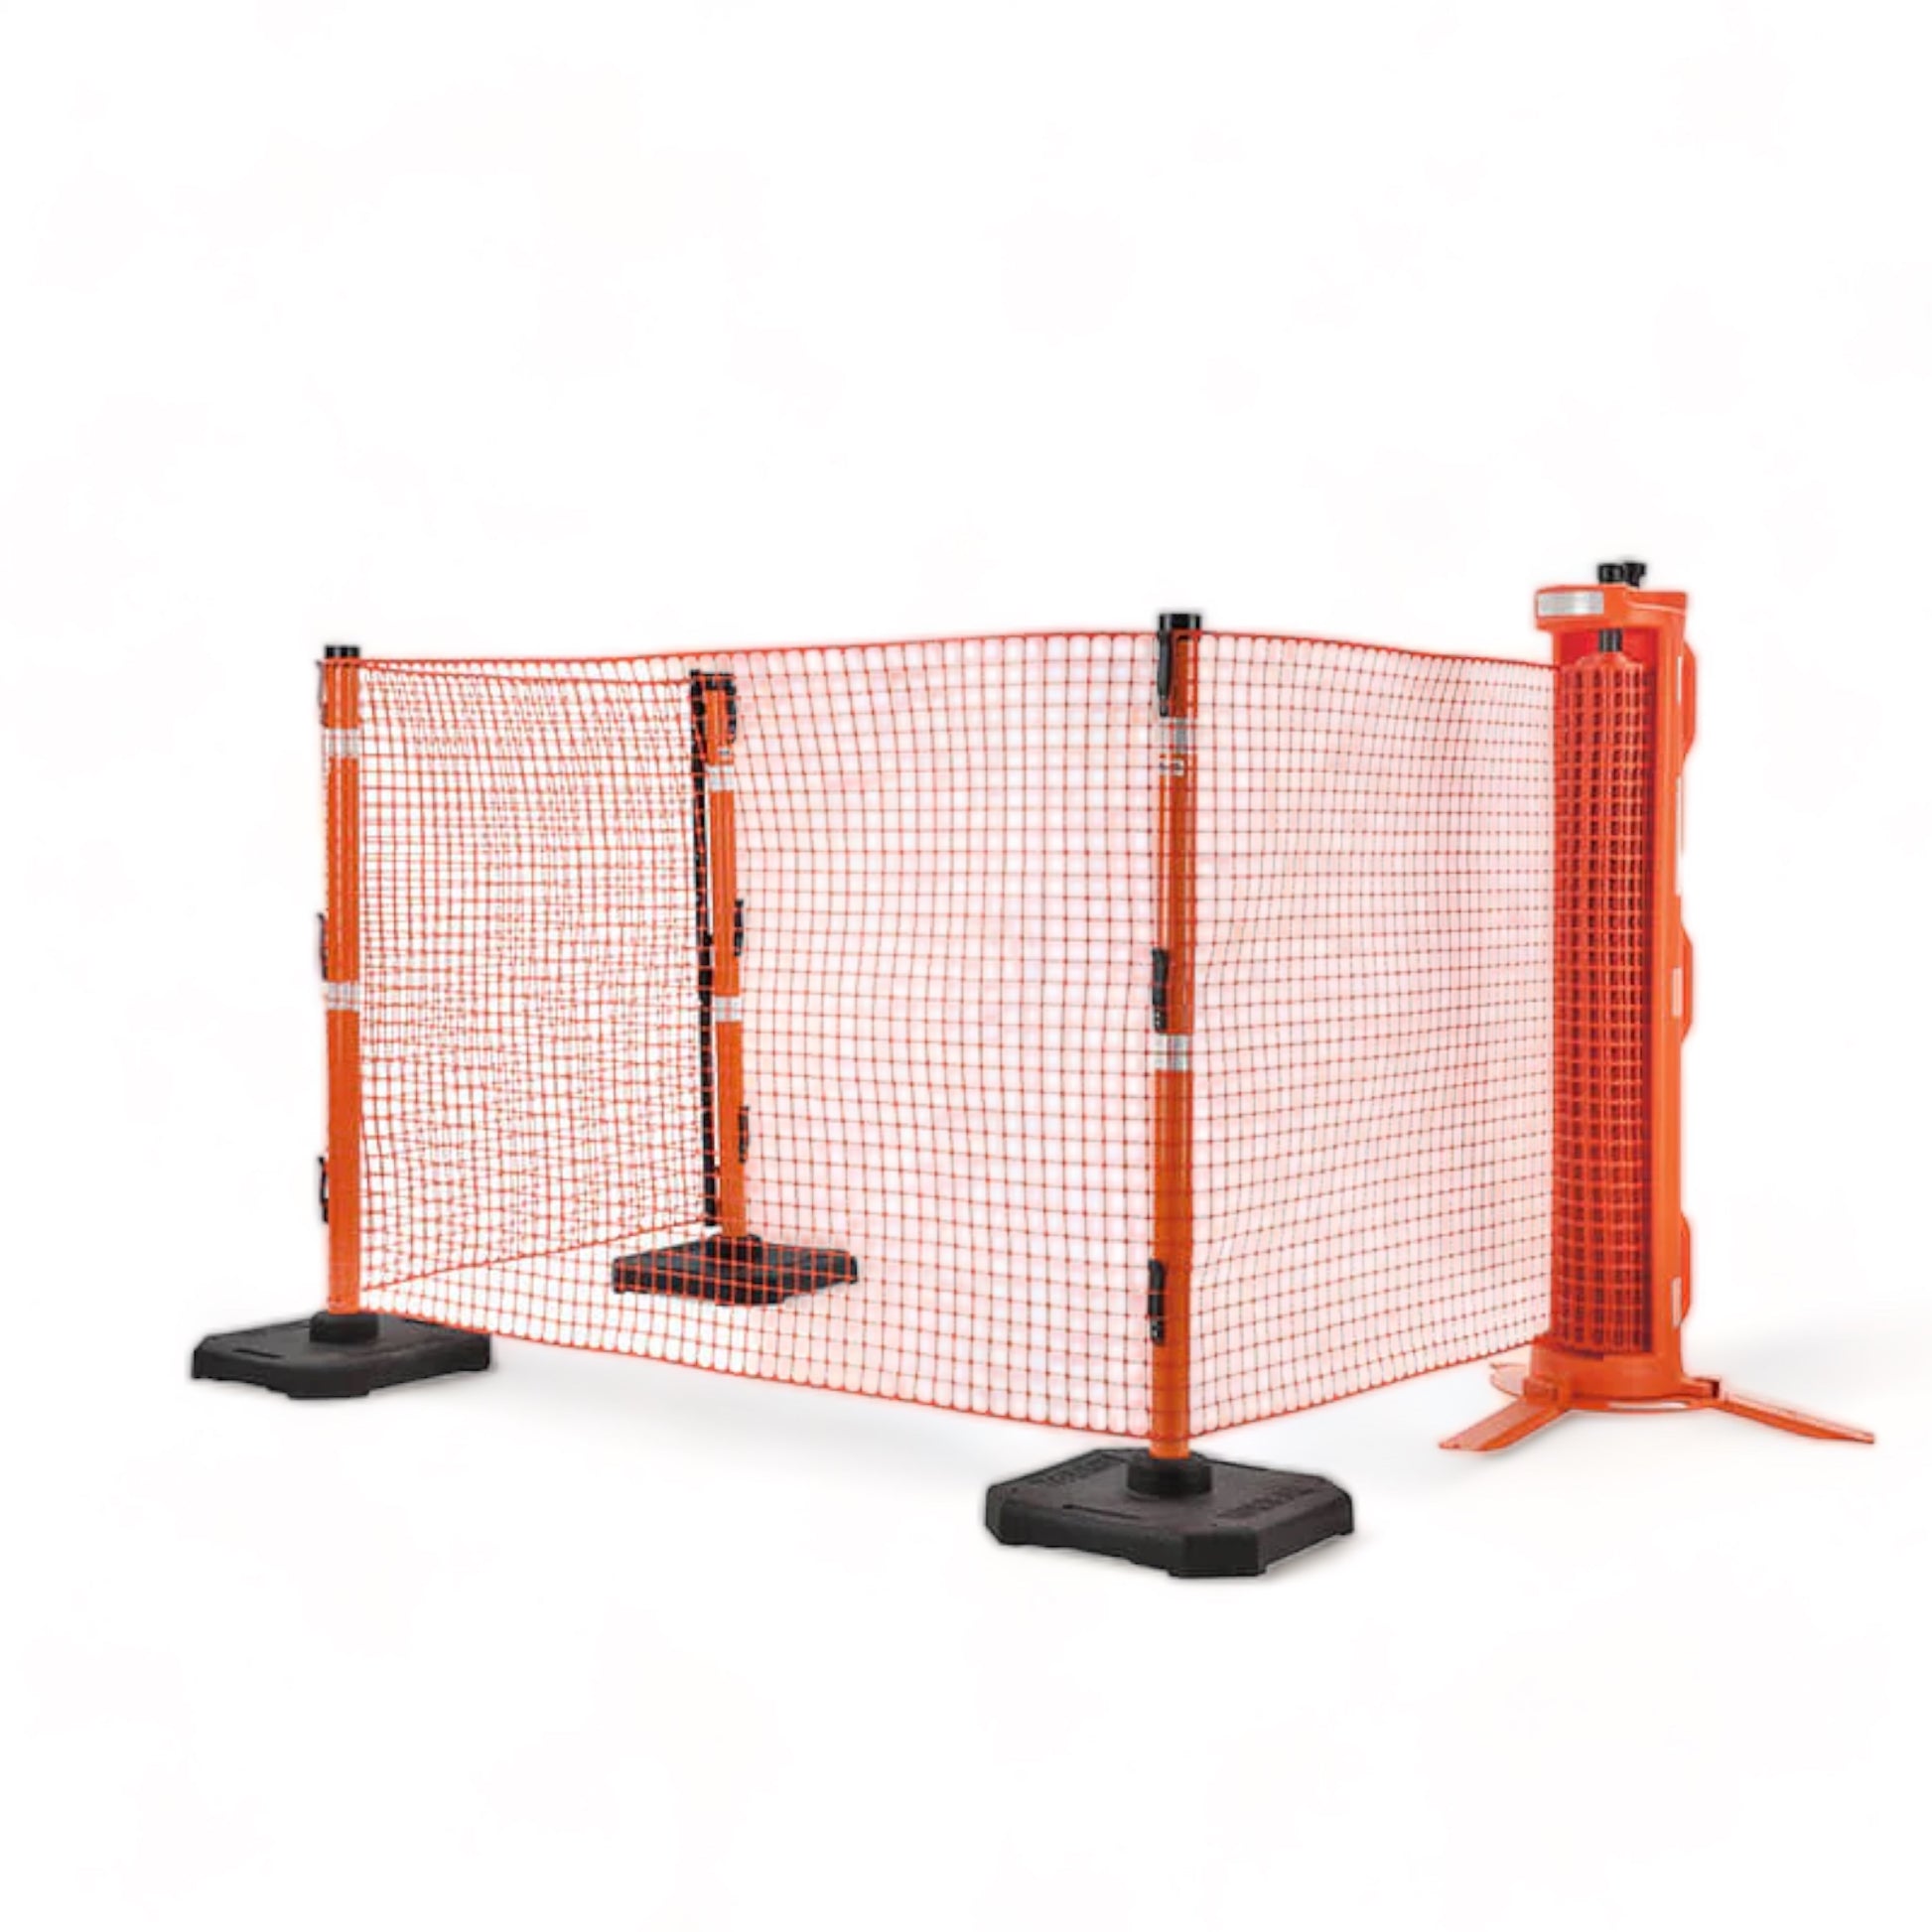 IPS RapidRoll 70-7050 Wheeled Fencing System, 50ft of fencing with 4 posts